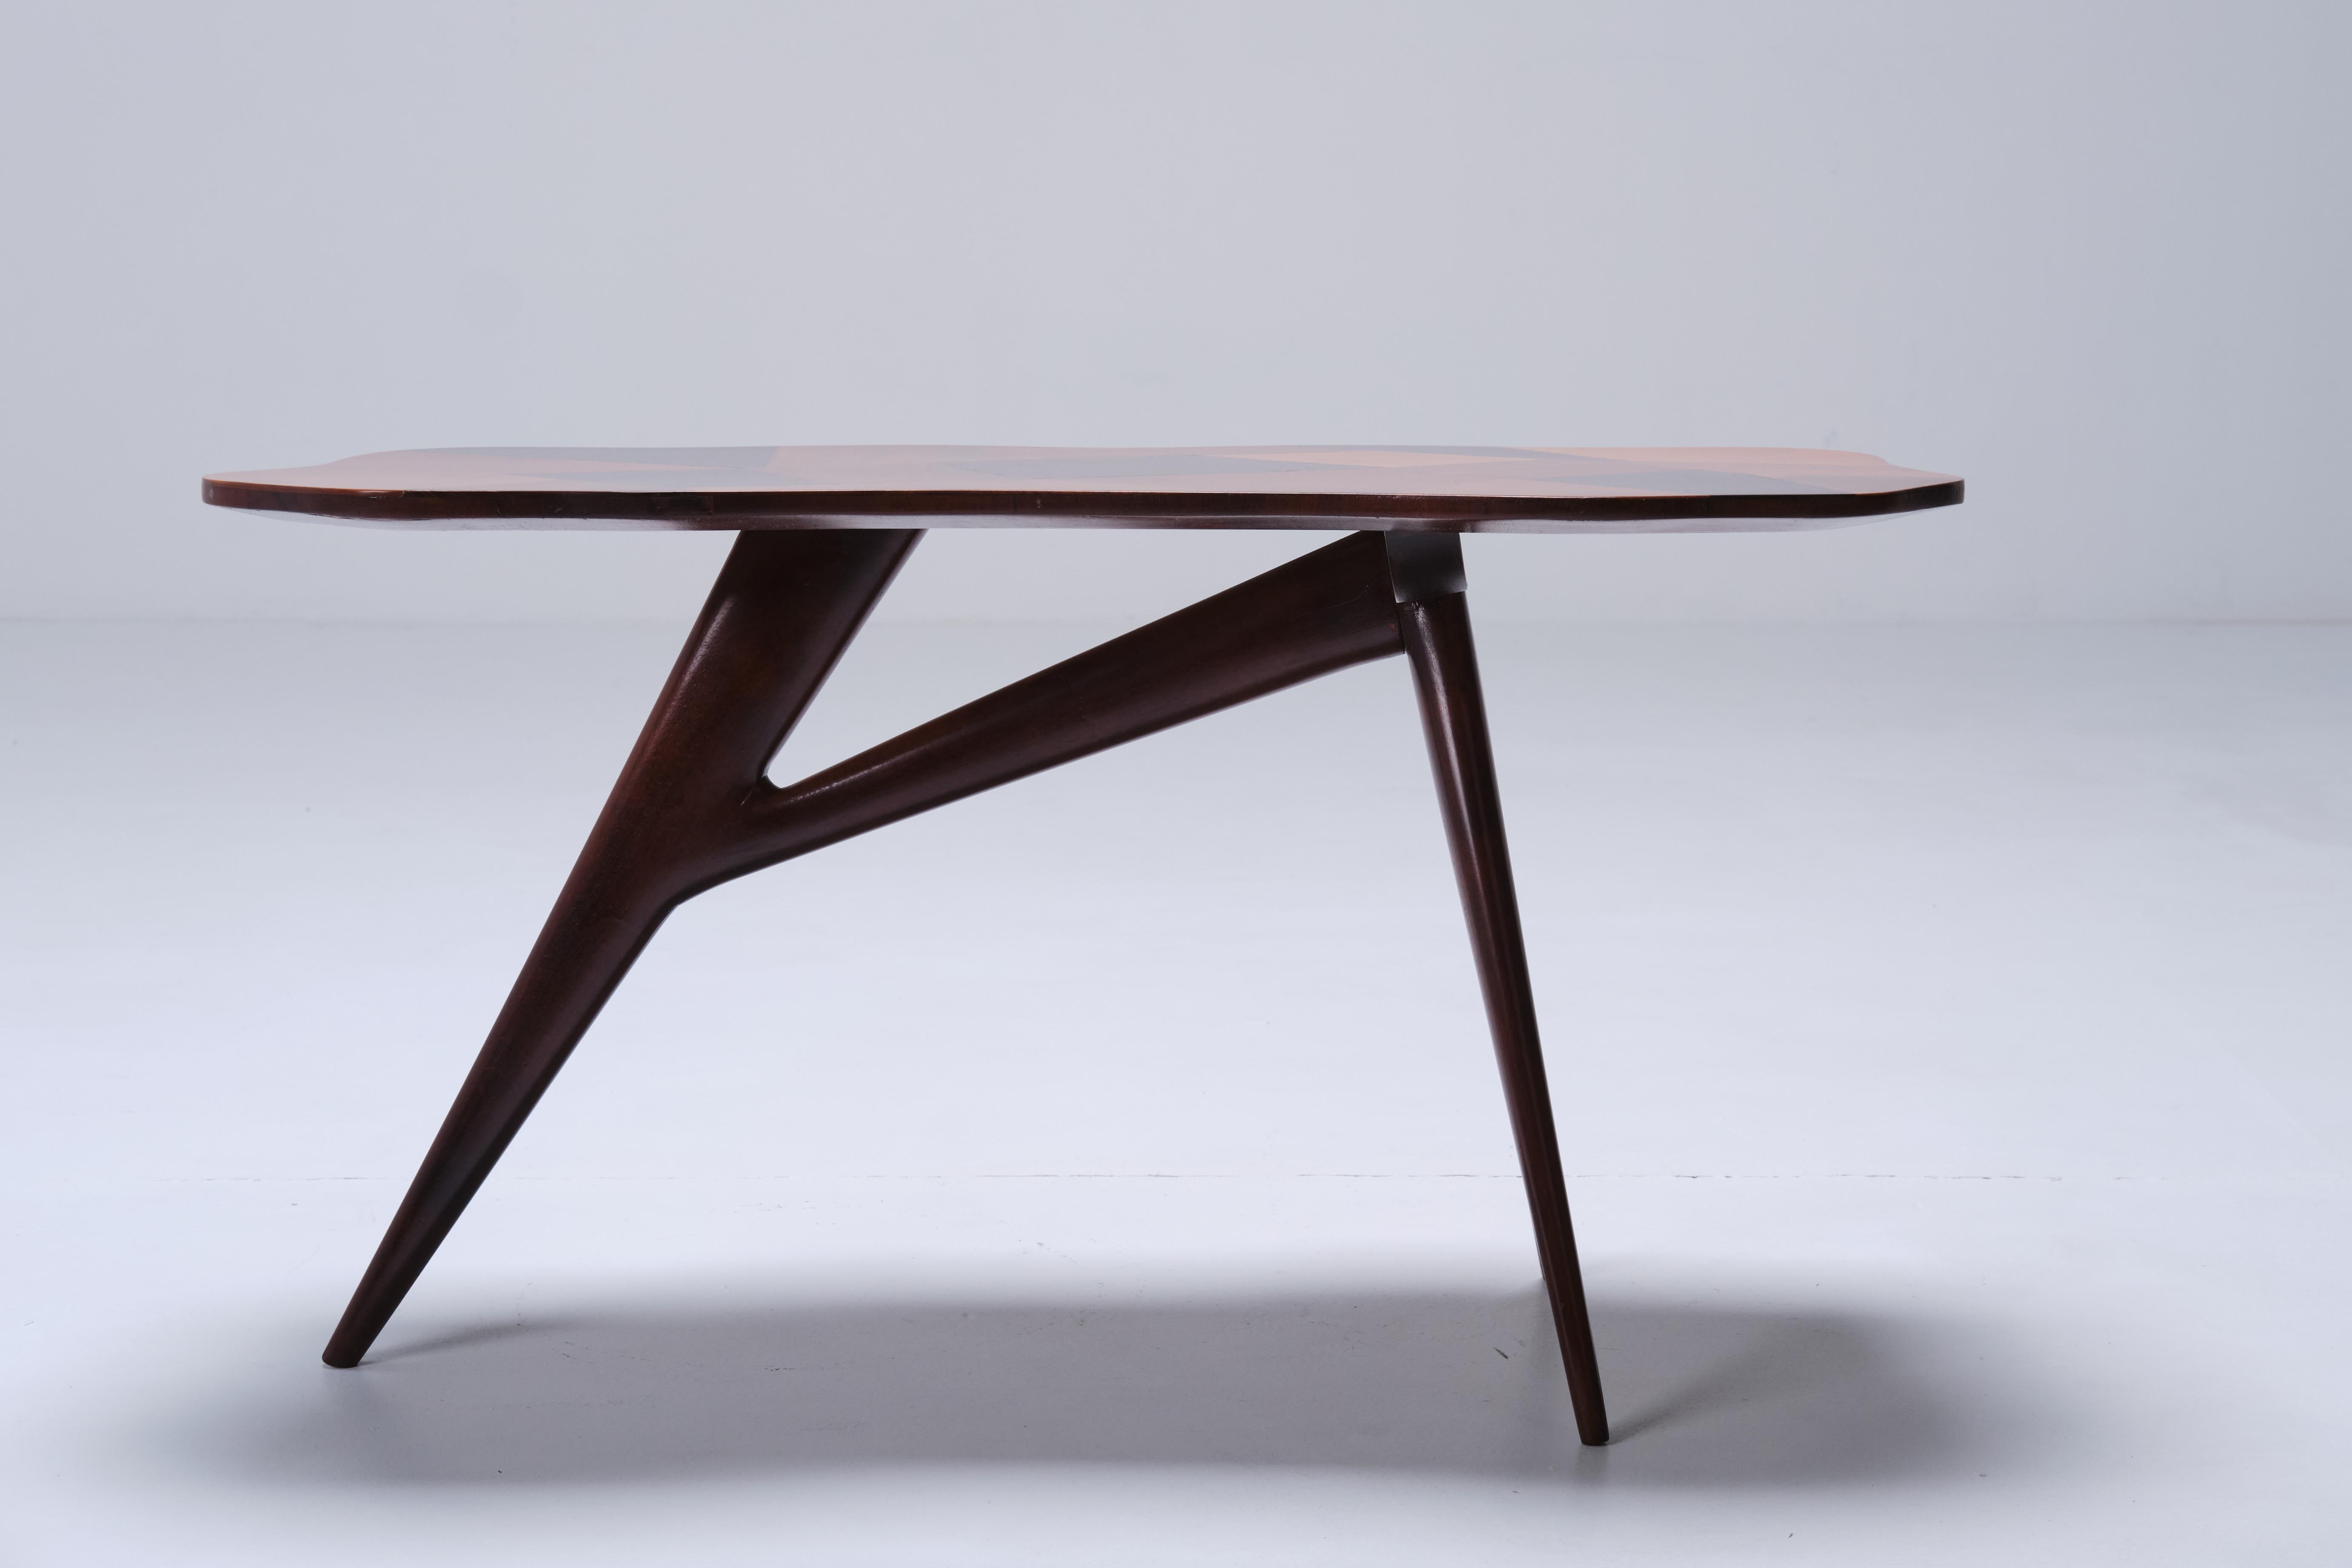 An extremely elegant low table by Pierluigi Giordani. Beautiful wood shape.
Giordani was appointed Correspondent Academic by the Academy of Arts and Design in 1970.
During his career, he also participates in numerous national and international